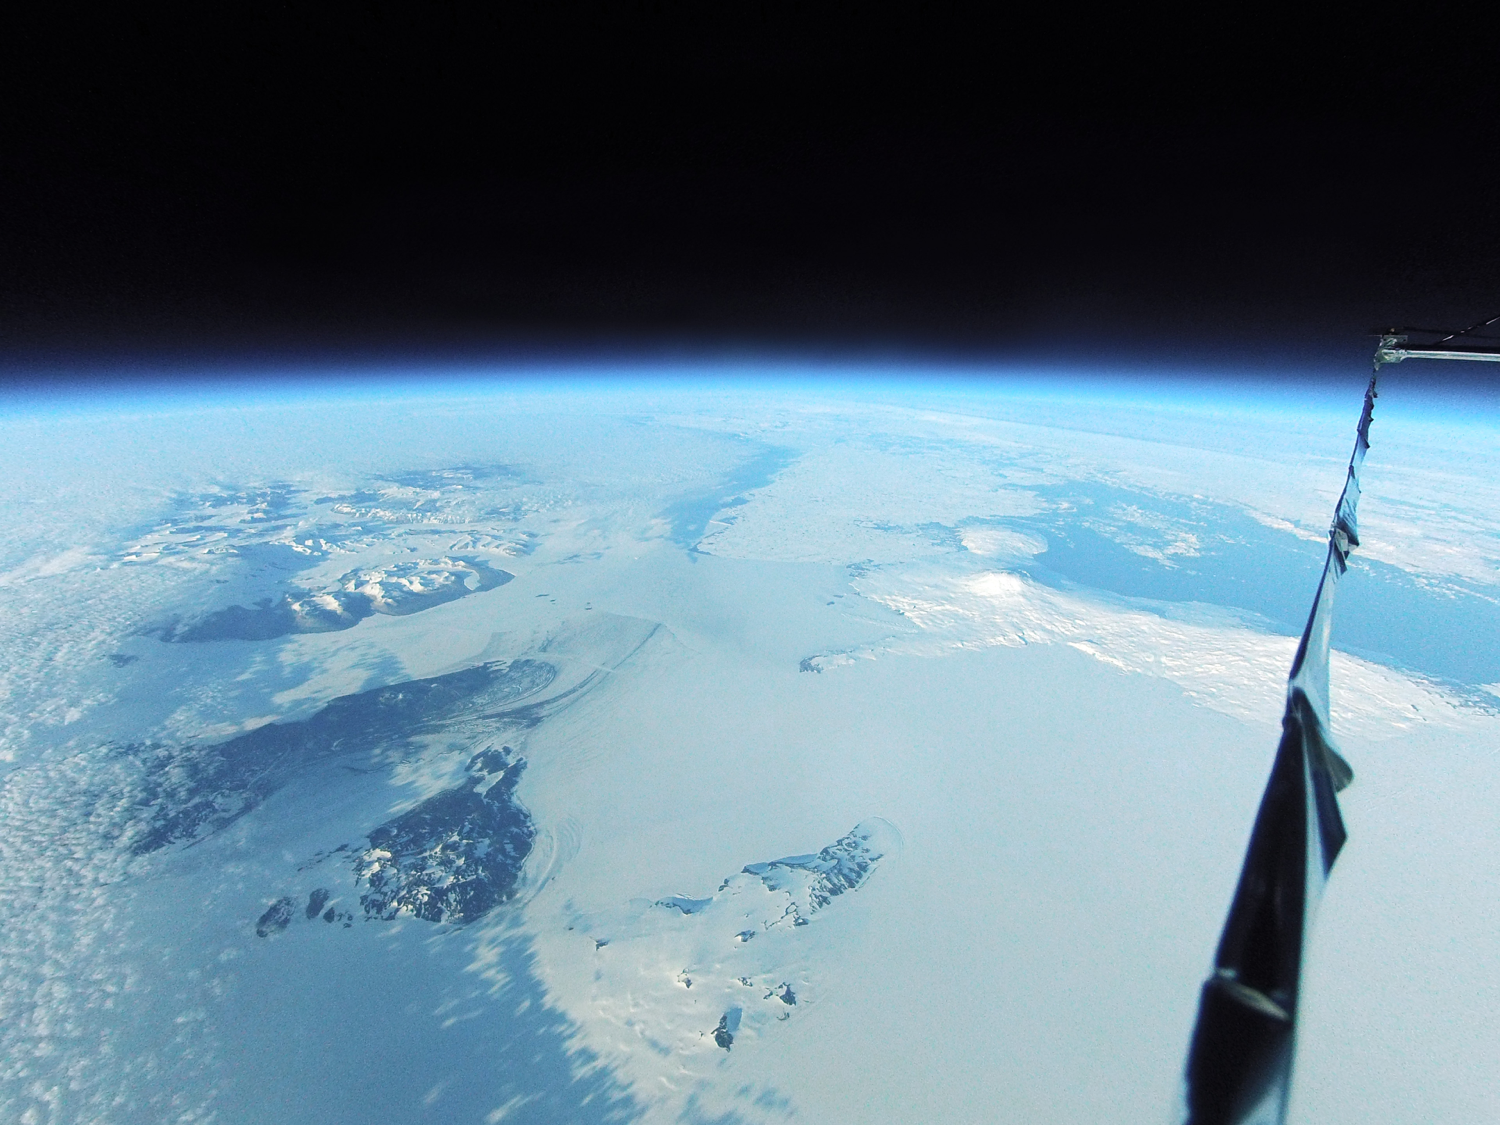 A view of the Earth and sky from the Spider stratospheric balloon telescope, about 35 km above Antarctica.